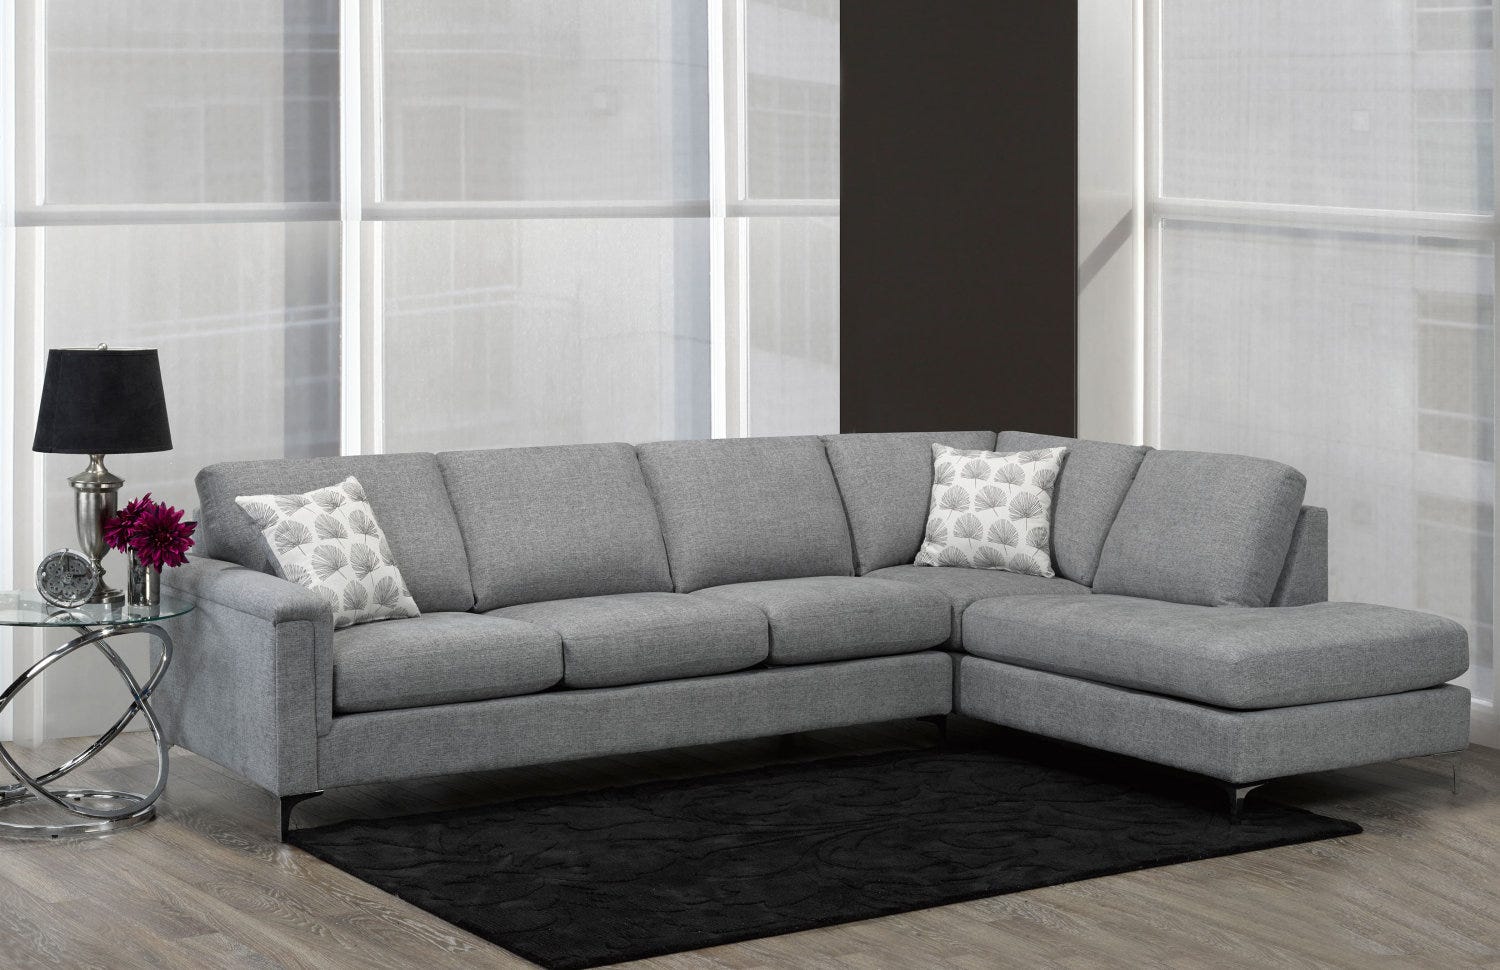 Canadian Made Hopkins Collection Fabric Sectional Sofa in Grey 9814